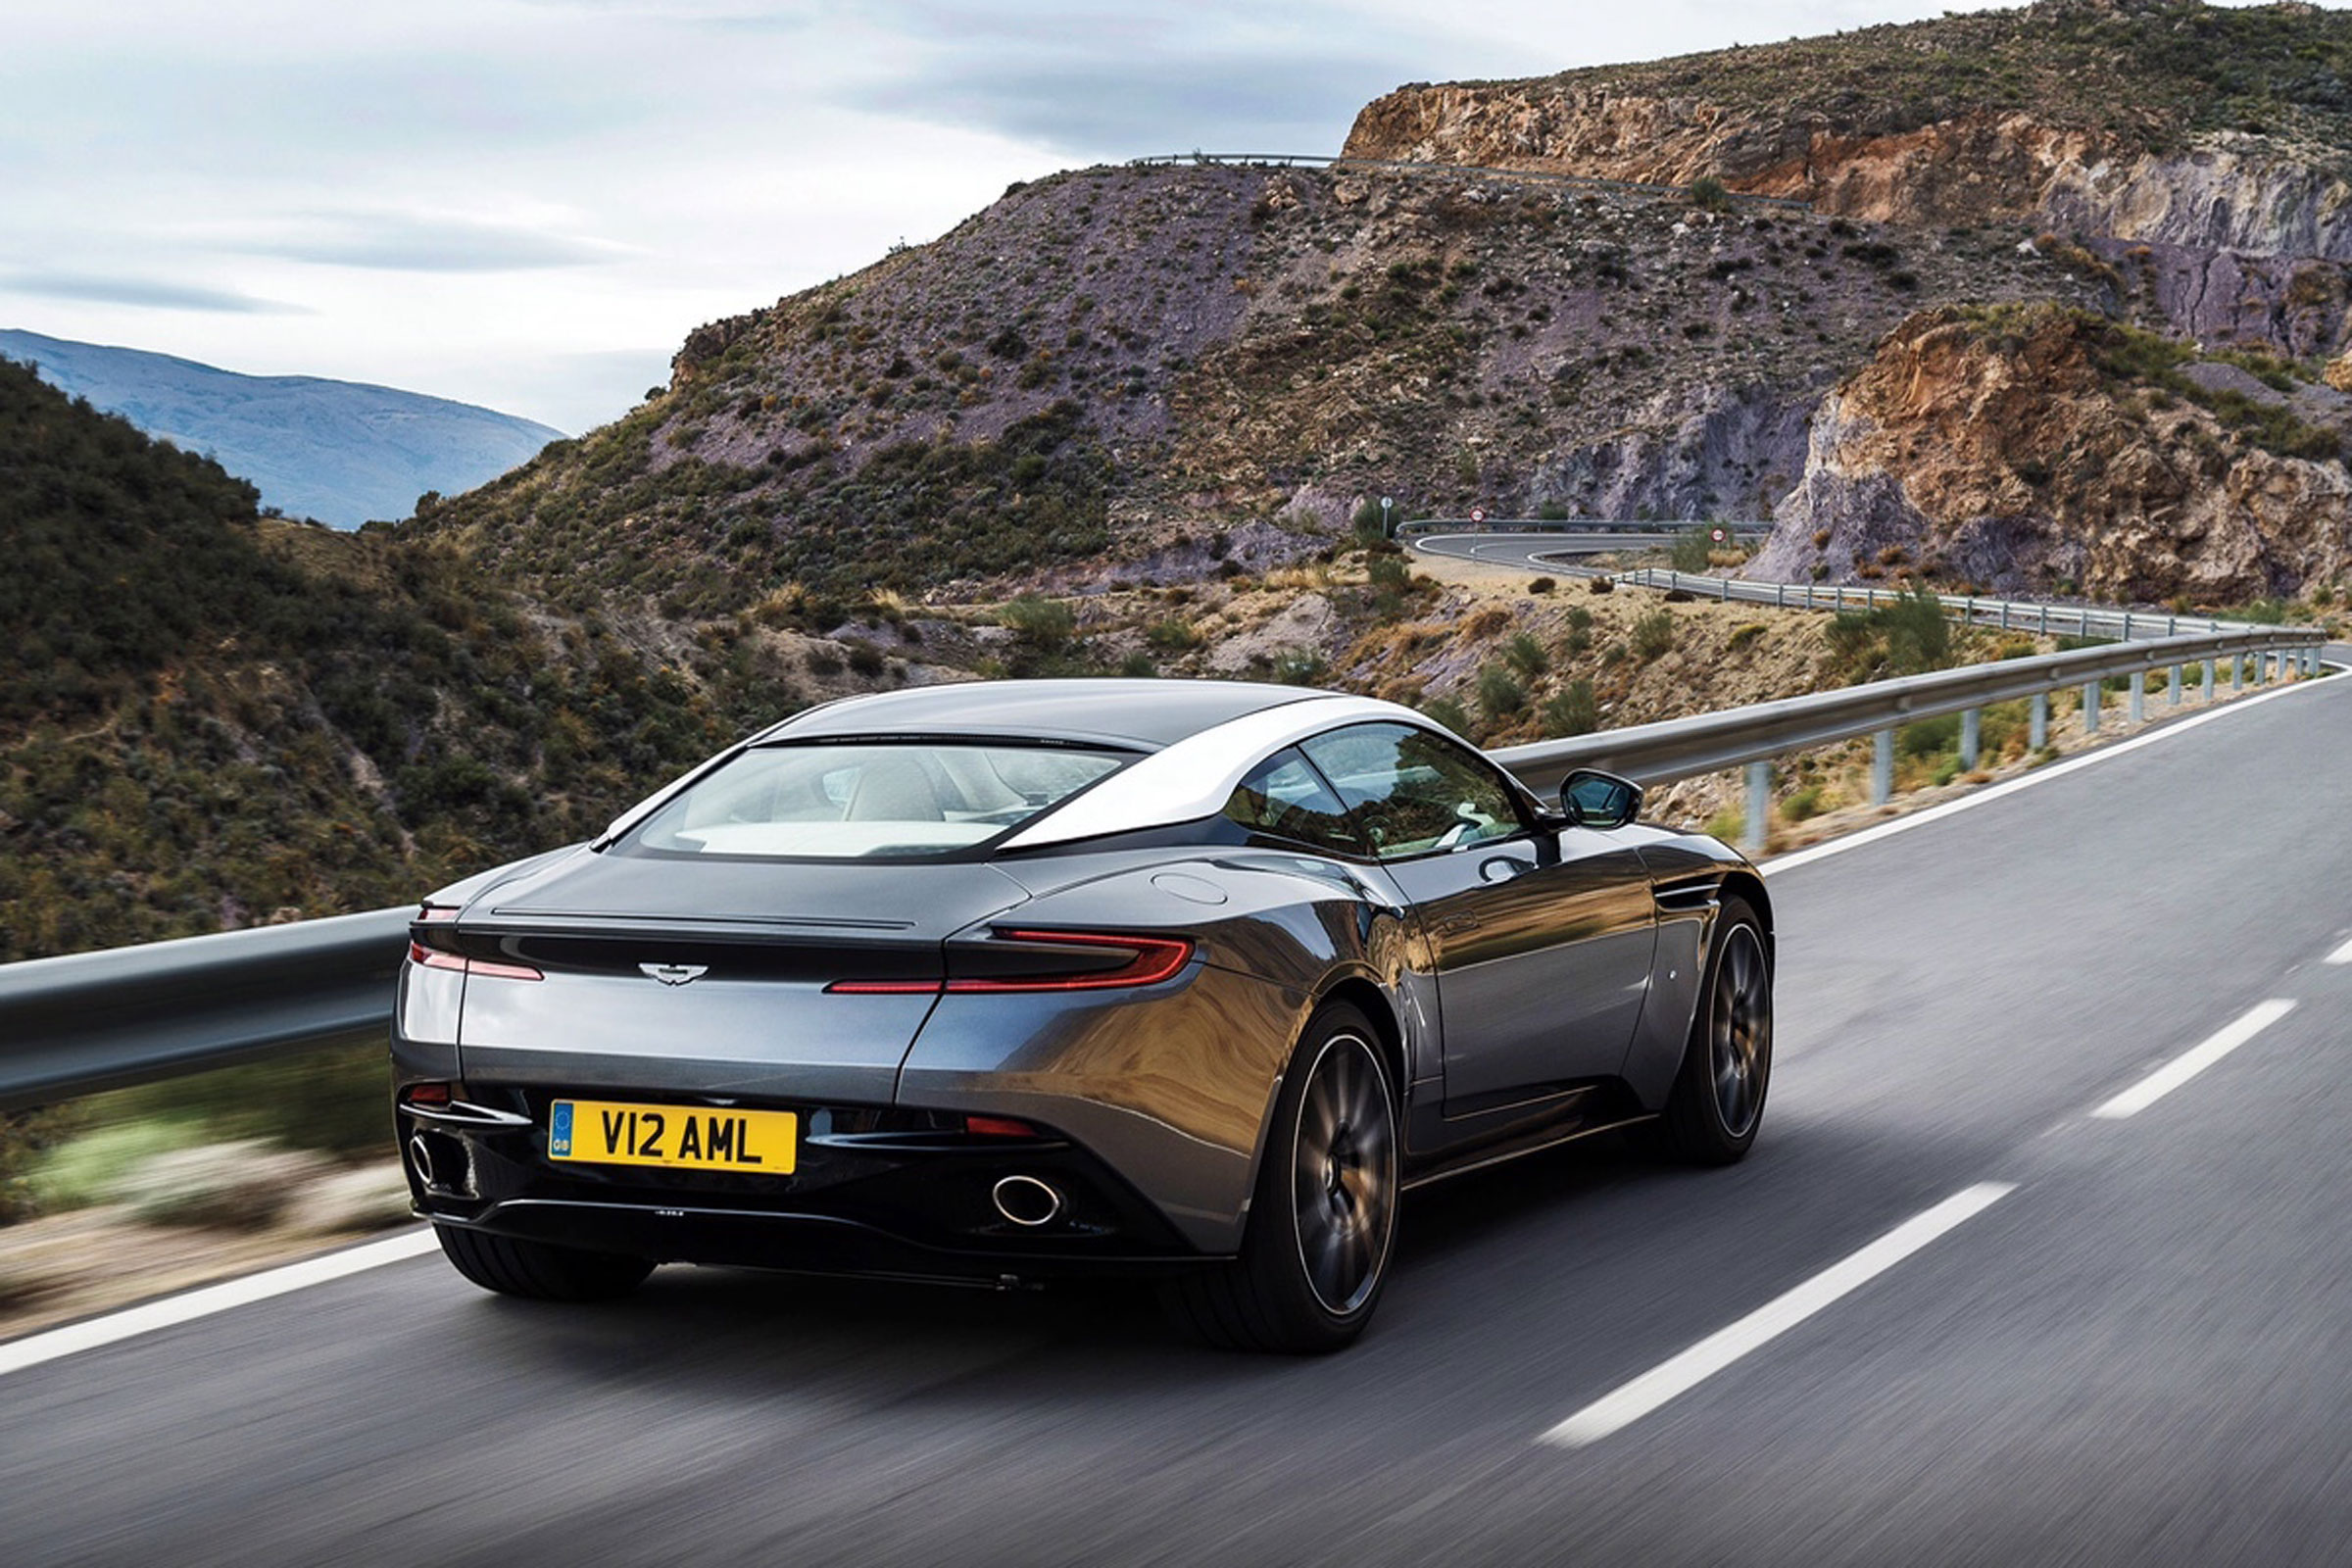 The Luxury And Power Of The 2017 Aston Martin DB11